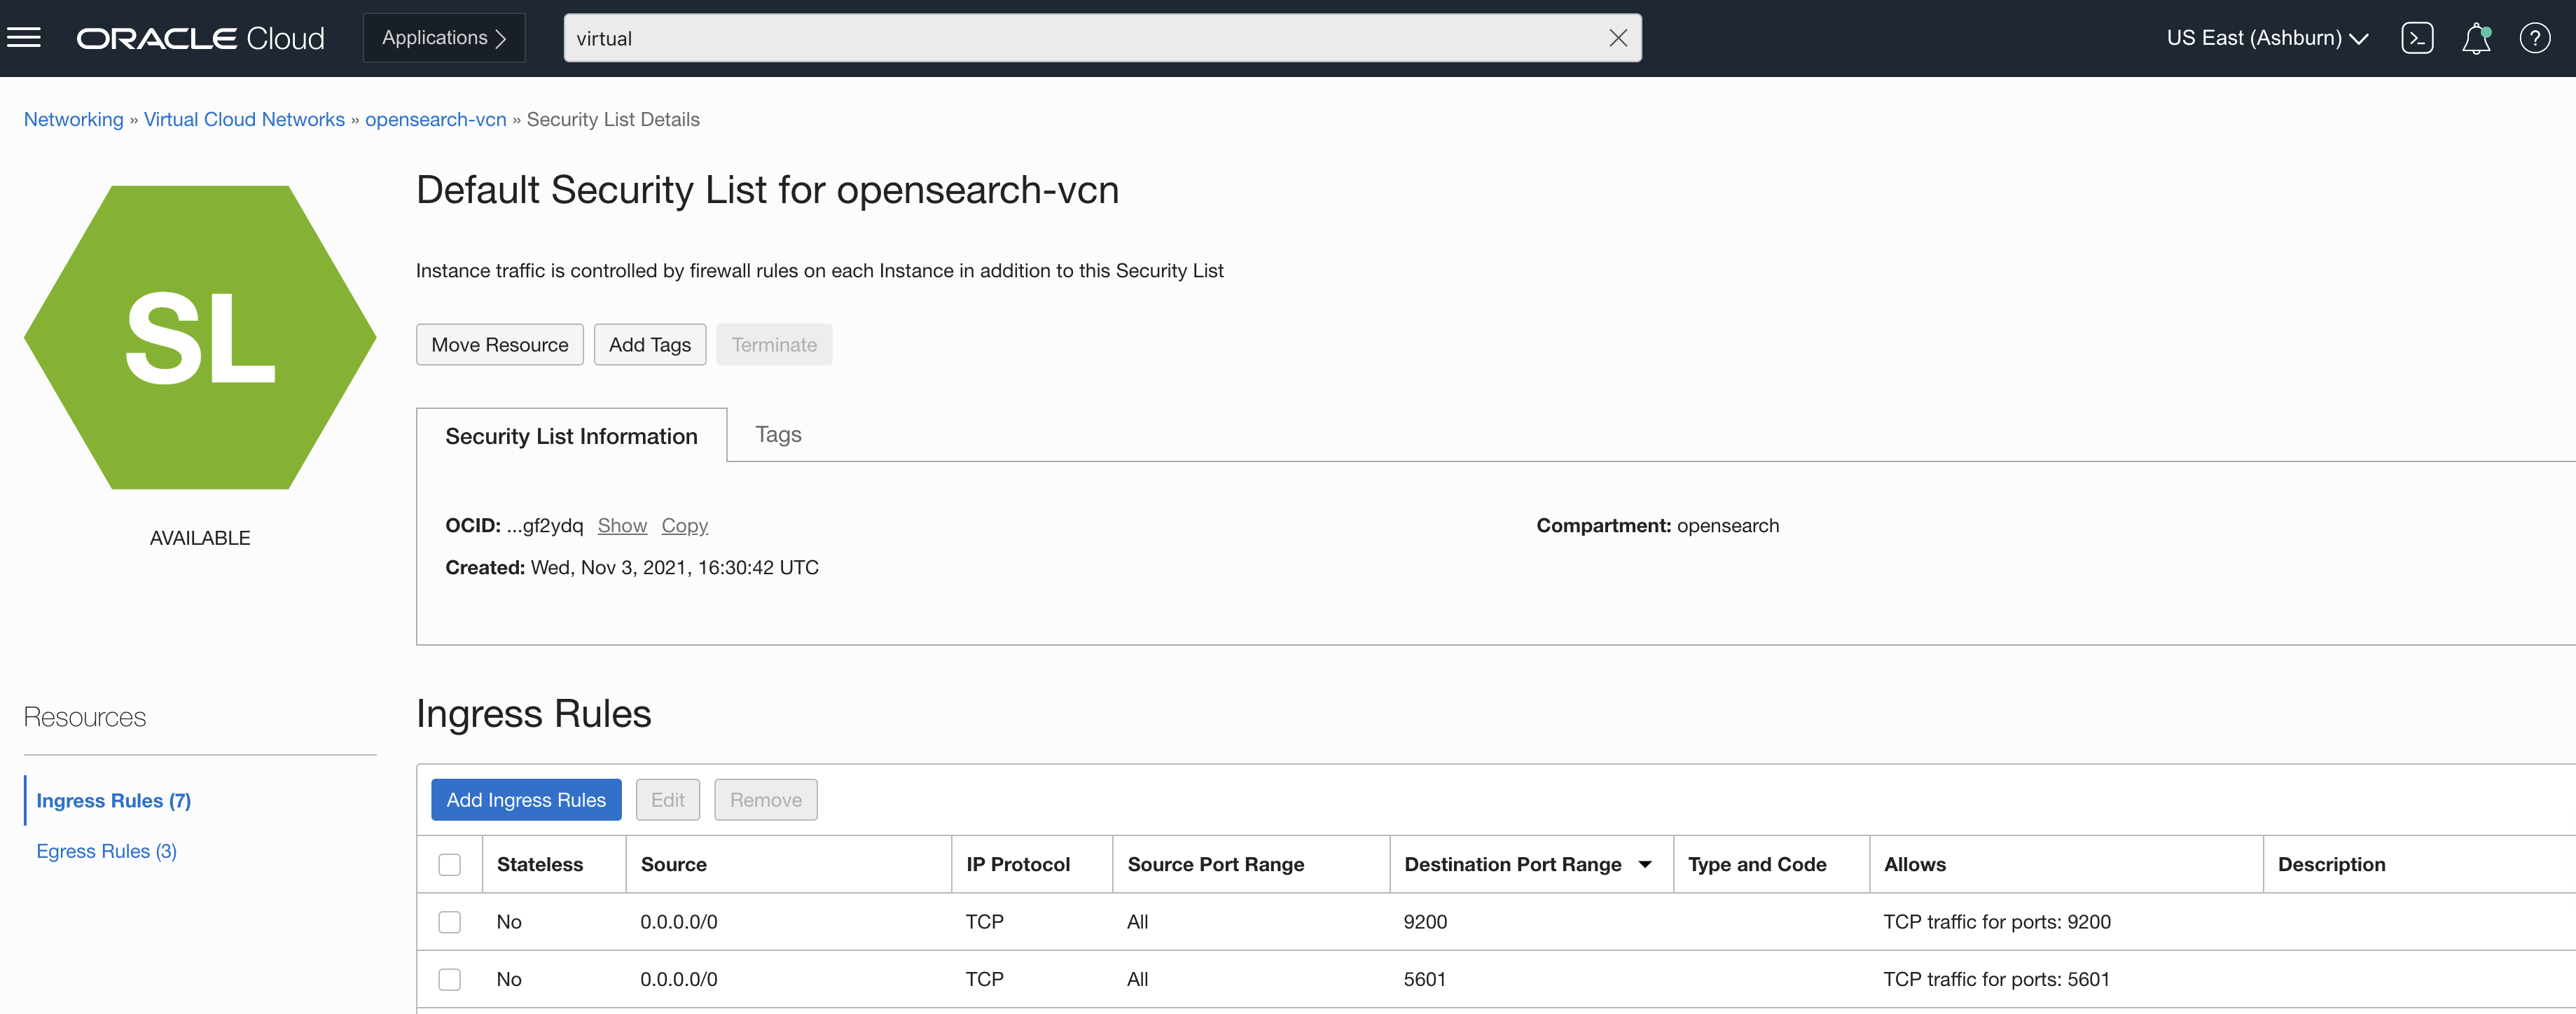 Default Security List for opensearch-vcn - table view